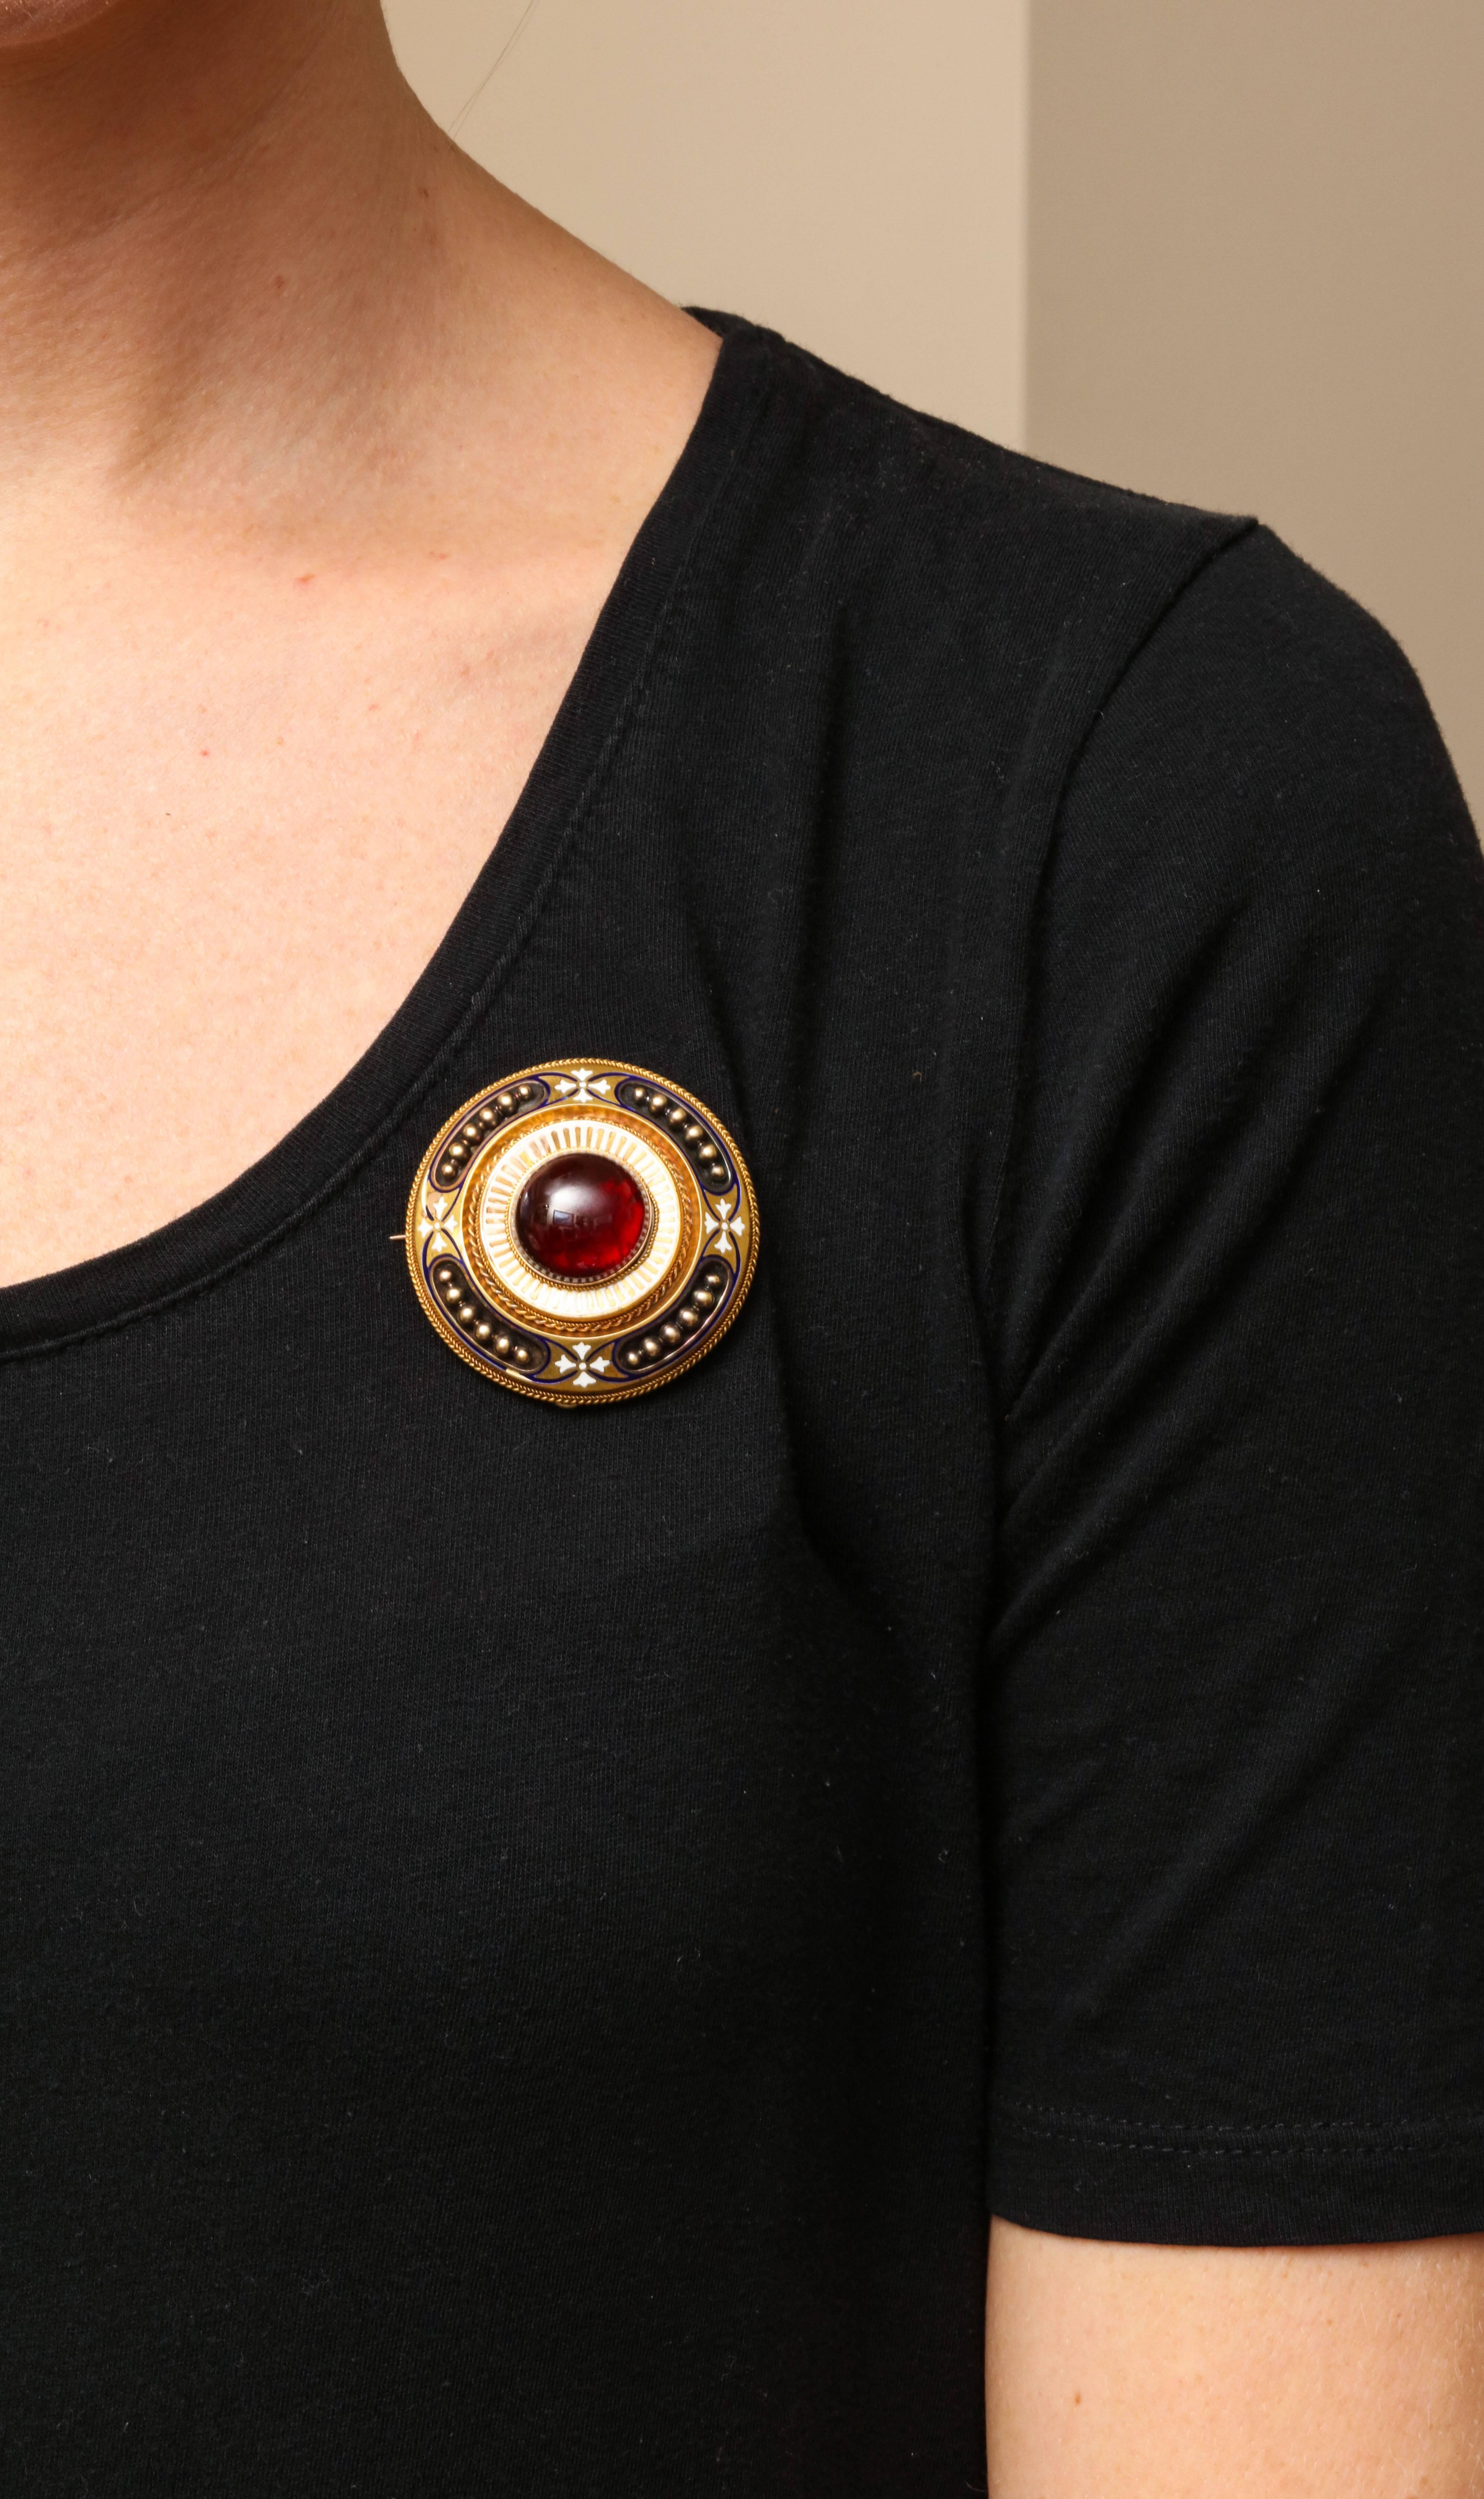 Antique Victorian Large Garnet White Enamel Gold Brooch In Excellent Condition For Sale In Stamford, CT